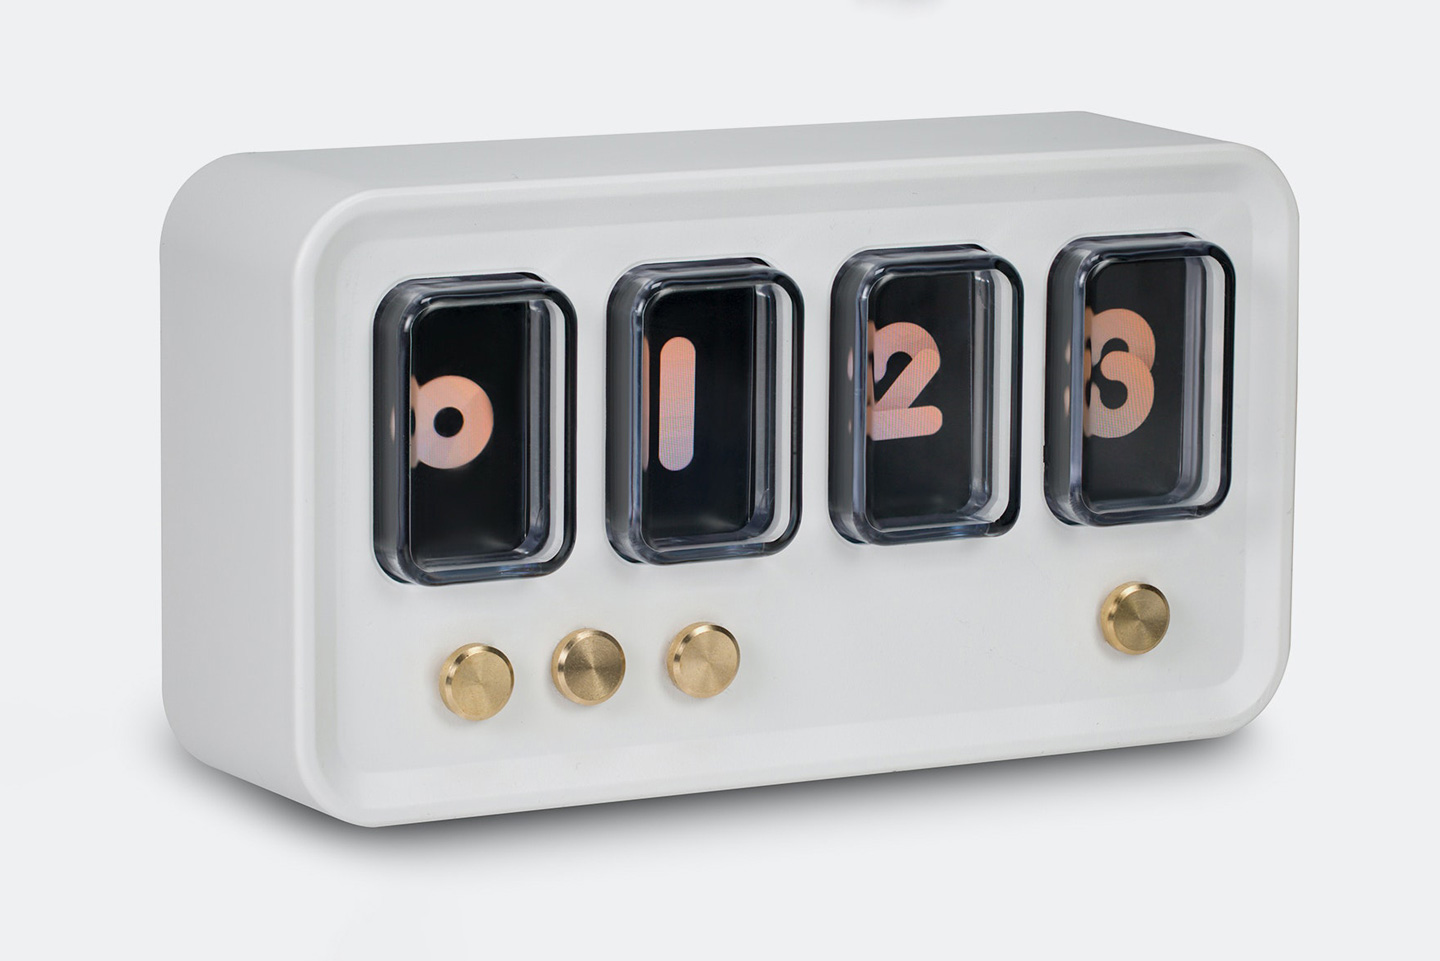 #This tabletop clock with 4 LCD screens is a modern reinterpretation of the retro Nixie tube clock